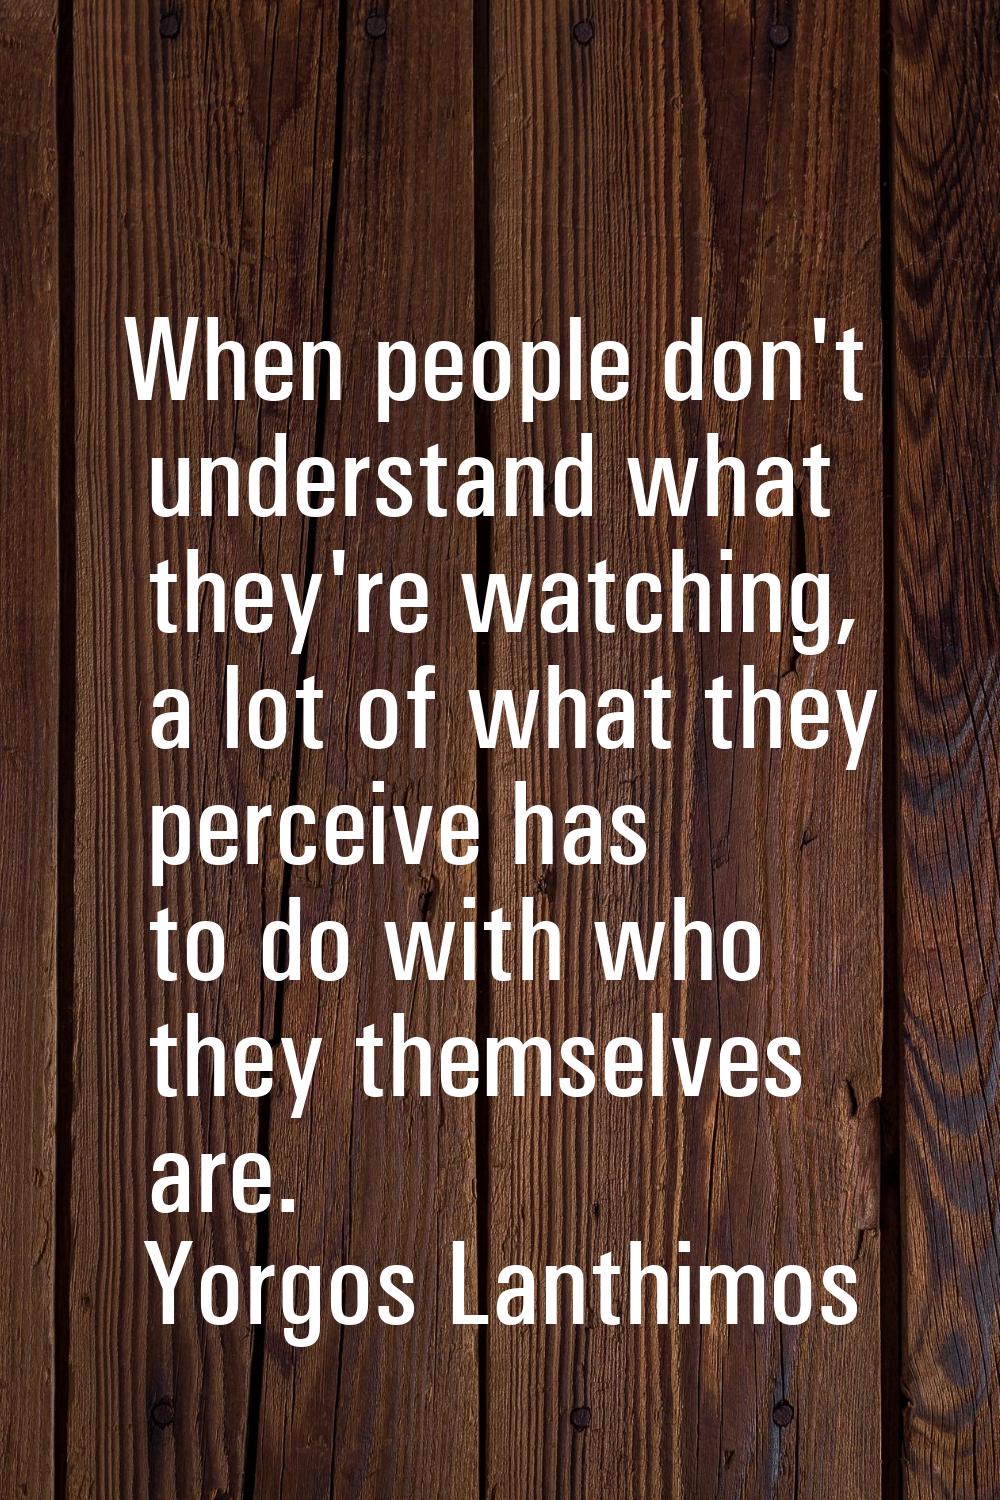 When people don't understand what they're watching, a lot of what they perceive has to do with who 